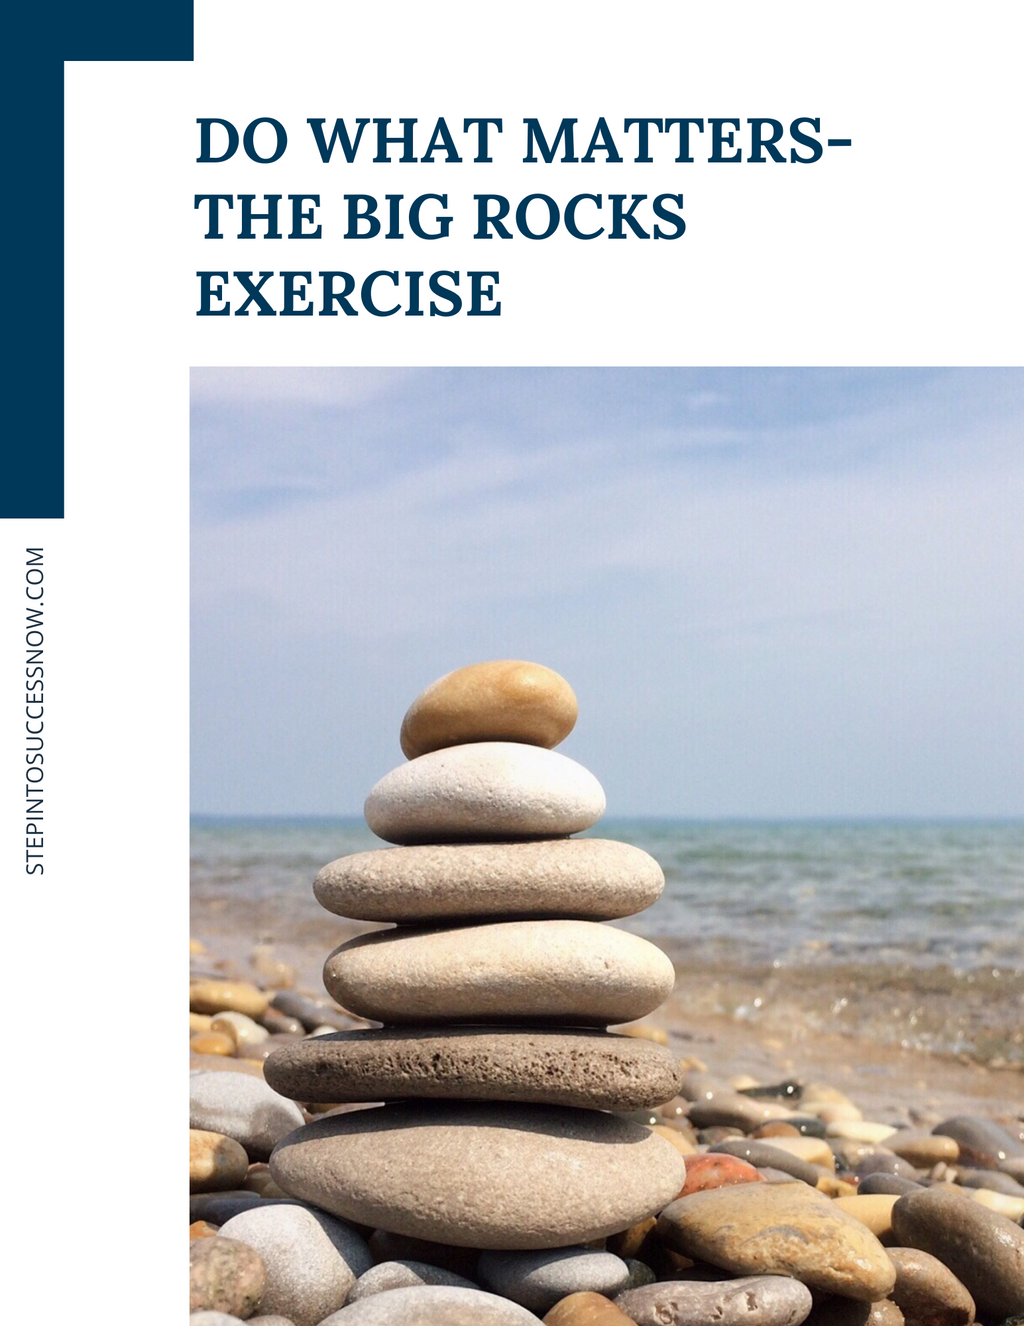 Do What Matters - The Big Rocks Exercise